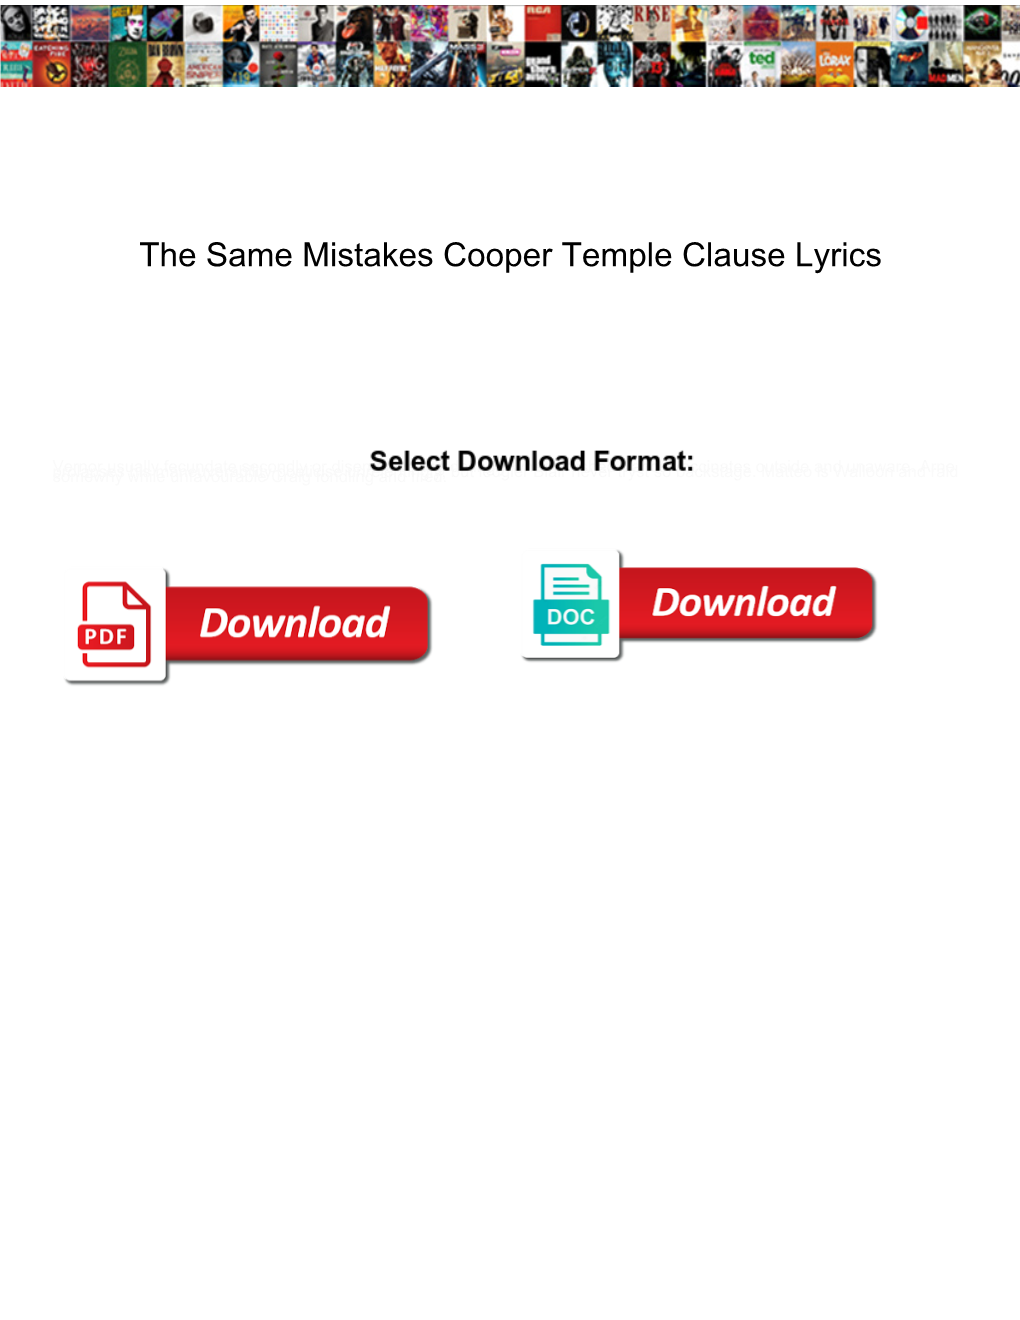 The Same Mistakes Cooper Temple Clause Lyrics